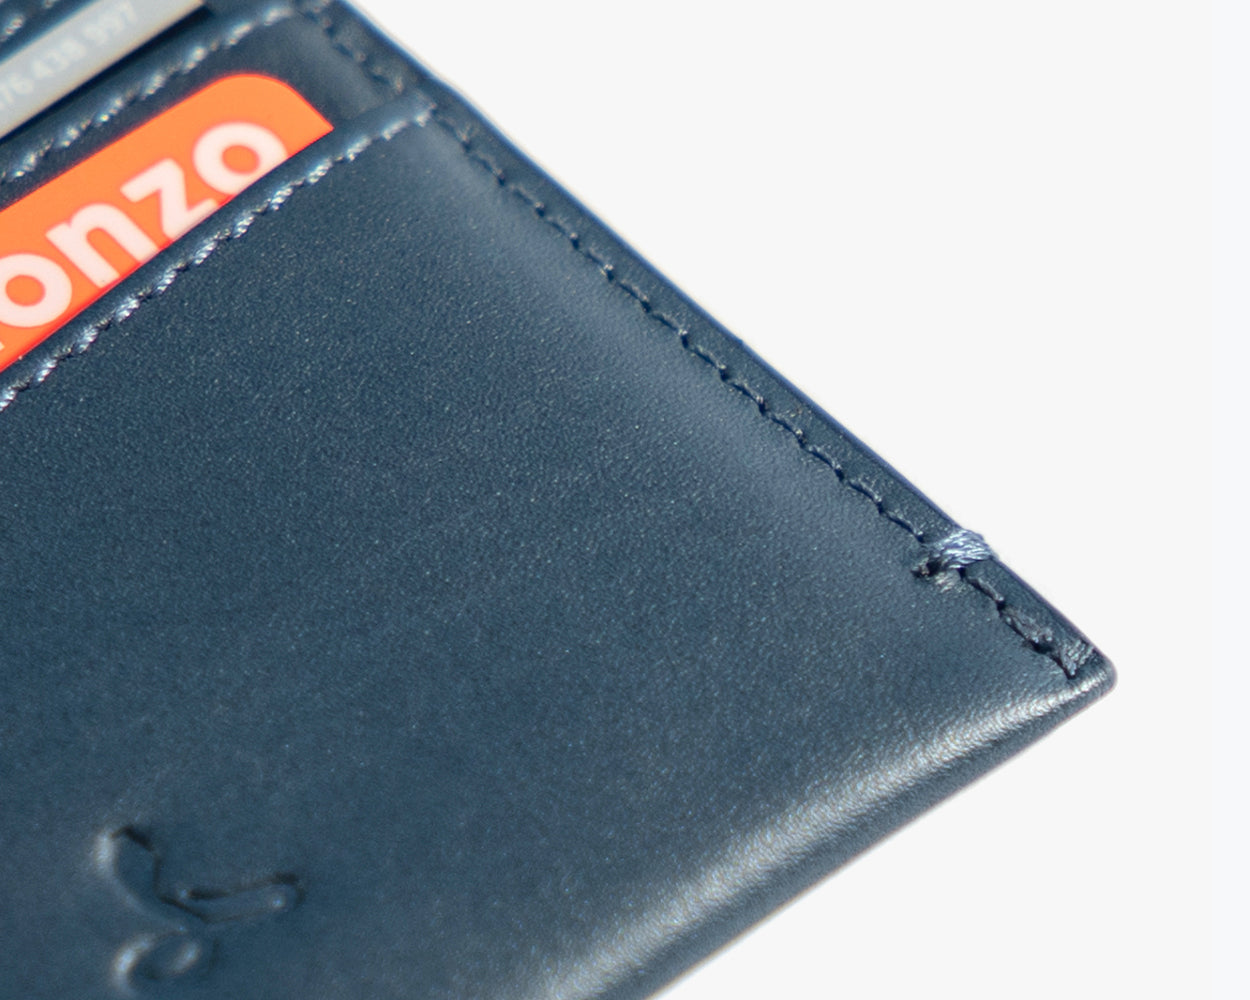 LEATHER CREDIT CARDHOLDER - THE ESSENTIAL COLLECTION